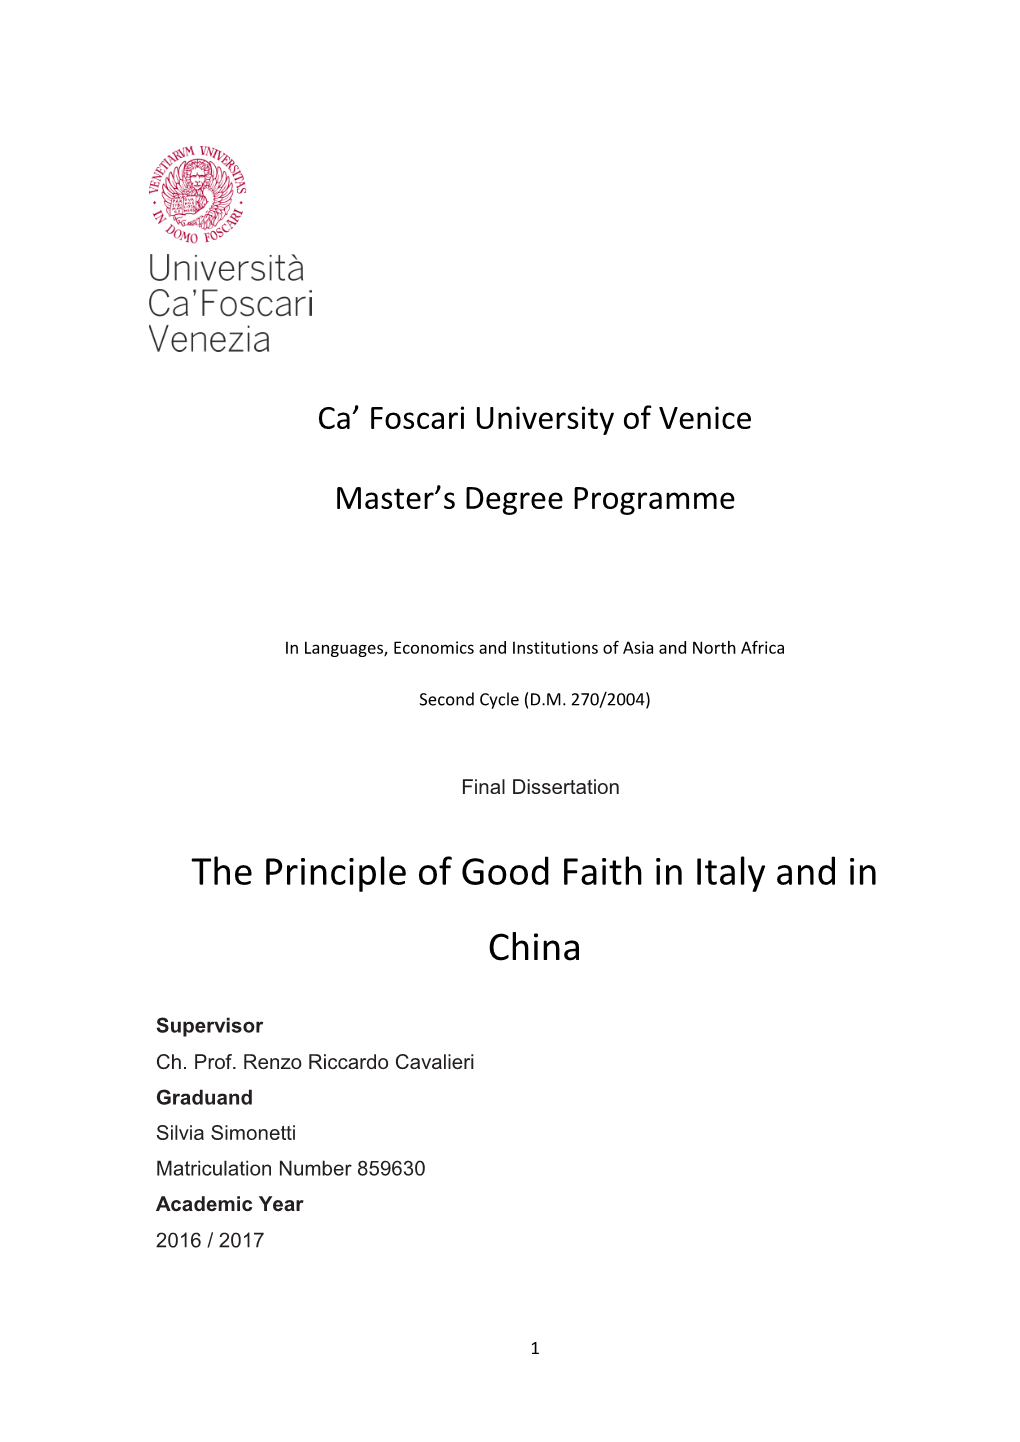 The Principle of Good Faith in Italy and in China